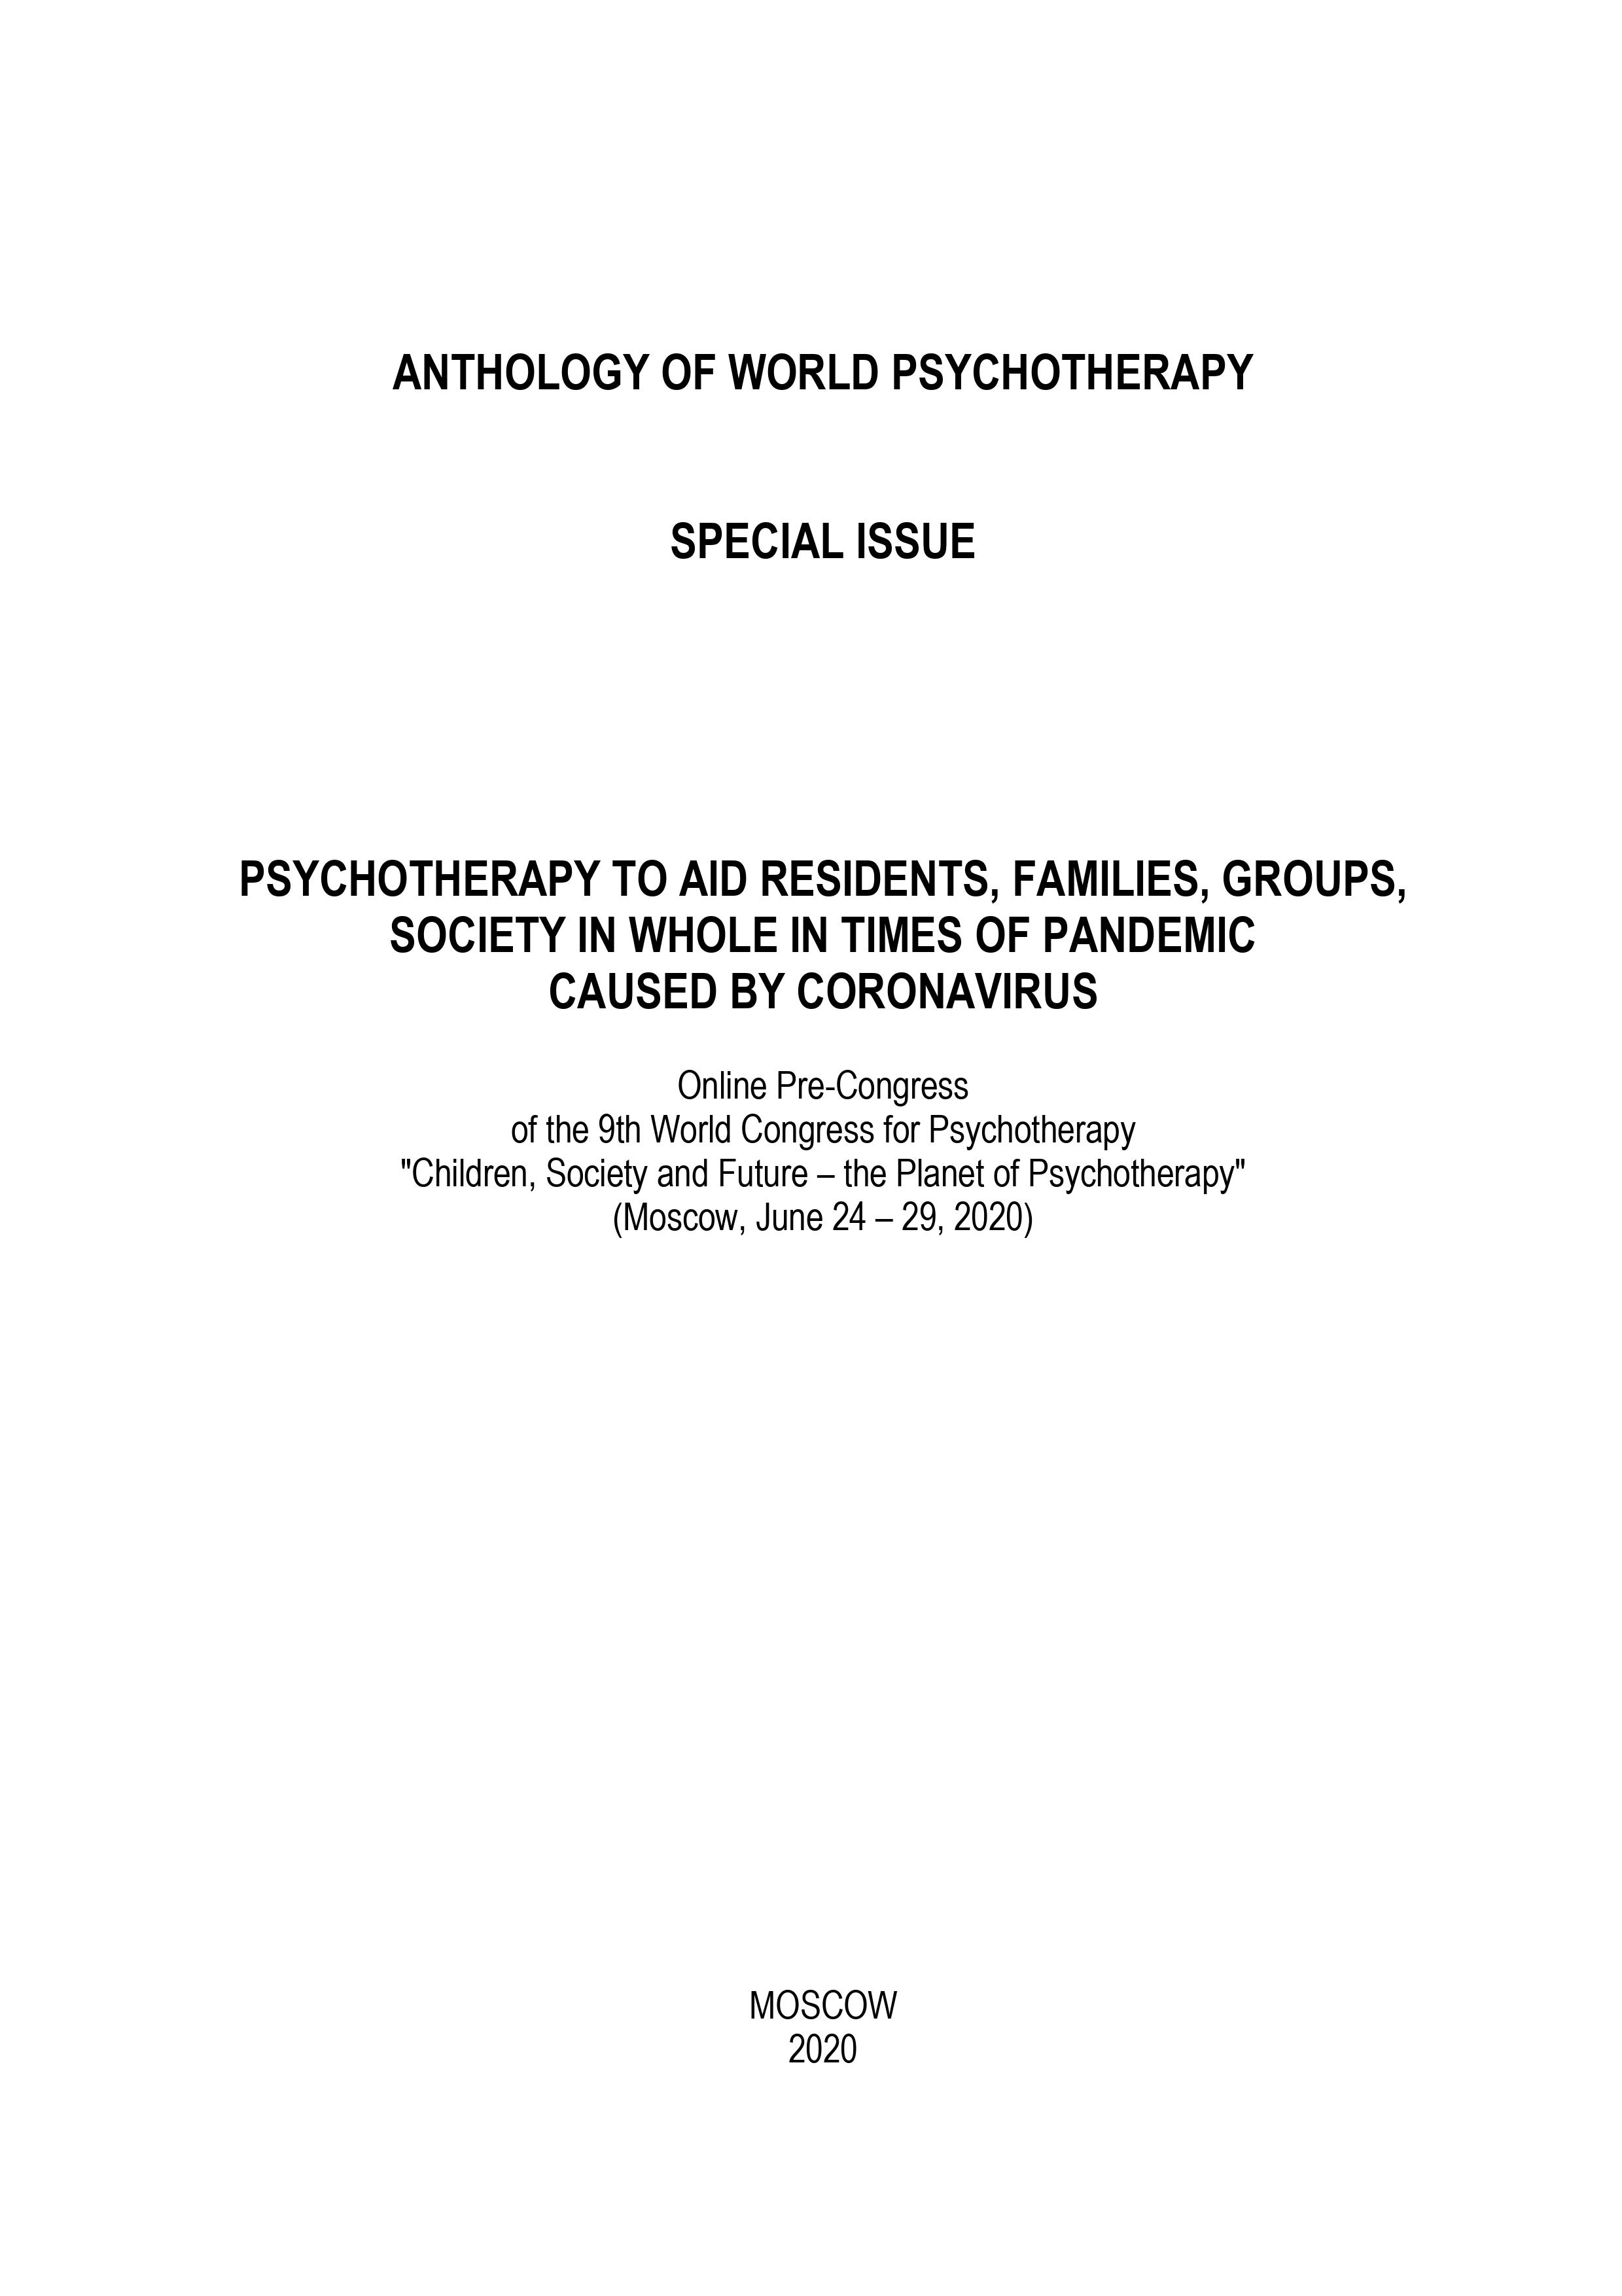 Internet Scientific Practical Journal "Anthology of Russian psychotherapy and psychology". Anthology of world psychotherapy. Special issue "Psychotherapy to aid residents, families, groups, society in whole in times of pandemic caused by coronavirus": Online Pre-Congress of the 9th World Congress for Psychotherapy "Children, Society and Future – the Planet of Psychotherapy" (Moscow, June 24 – 29, 2020)